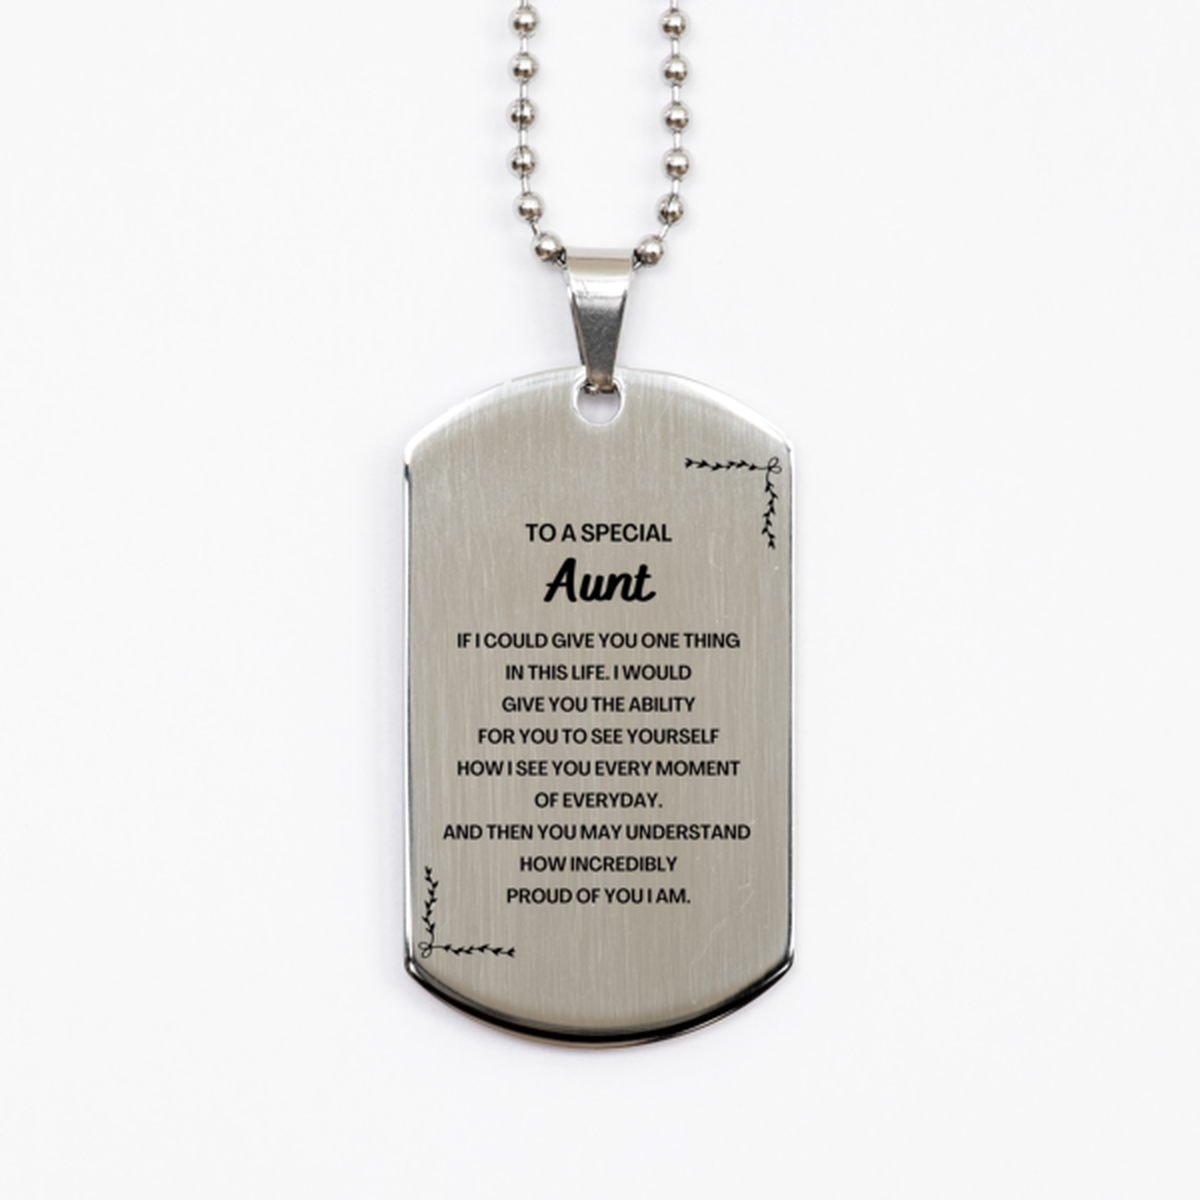 To My Aunt Silver Dog Tag, Gifts For Aunt Engraved, Inspirational Gifts for Christmas Birthday, Epic Gifts for Aunt To A Special Aunt how incredibly proud of you I am